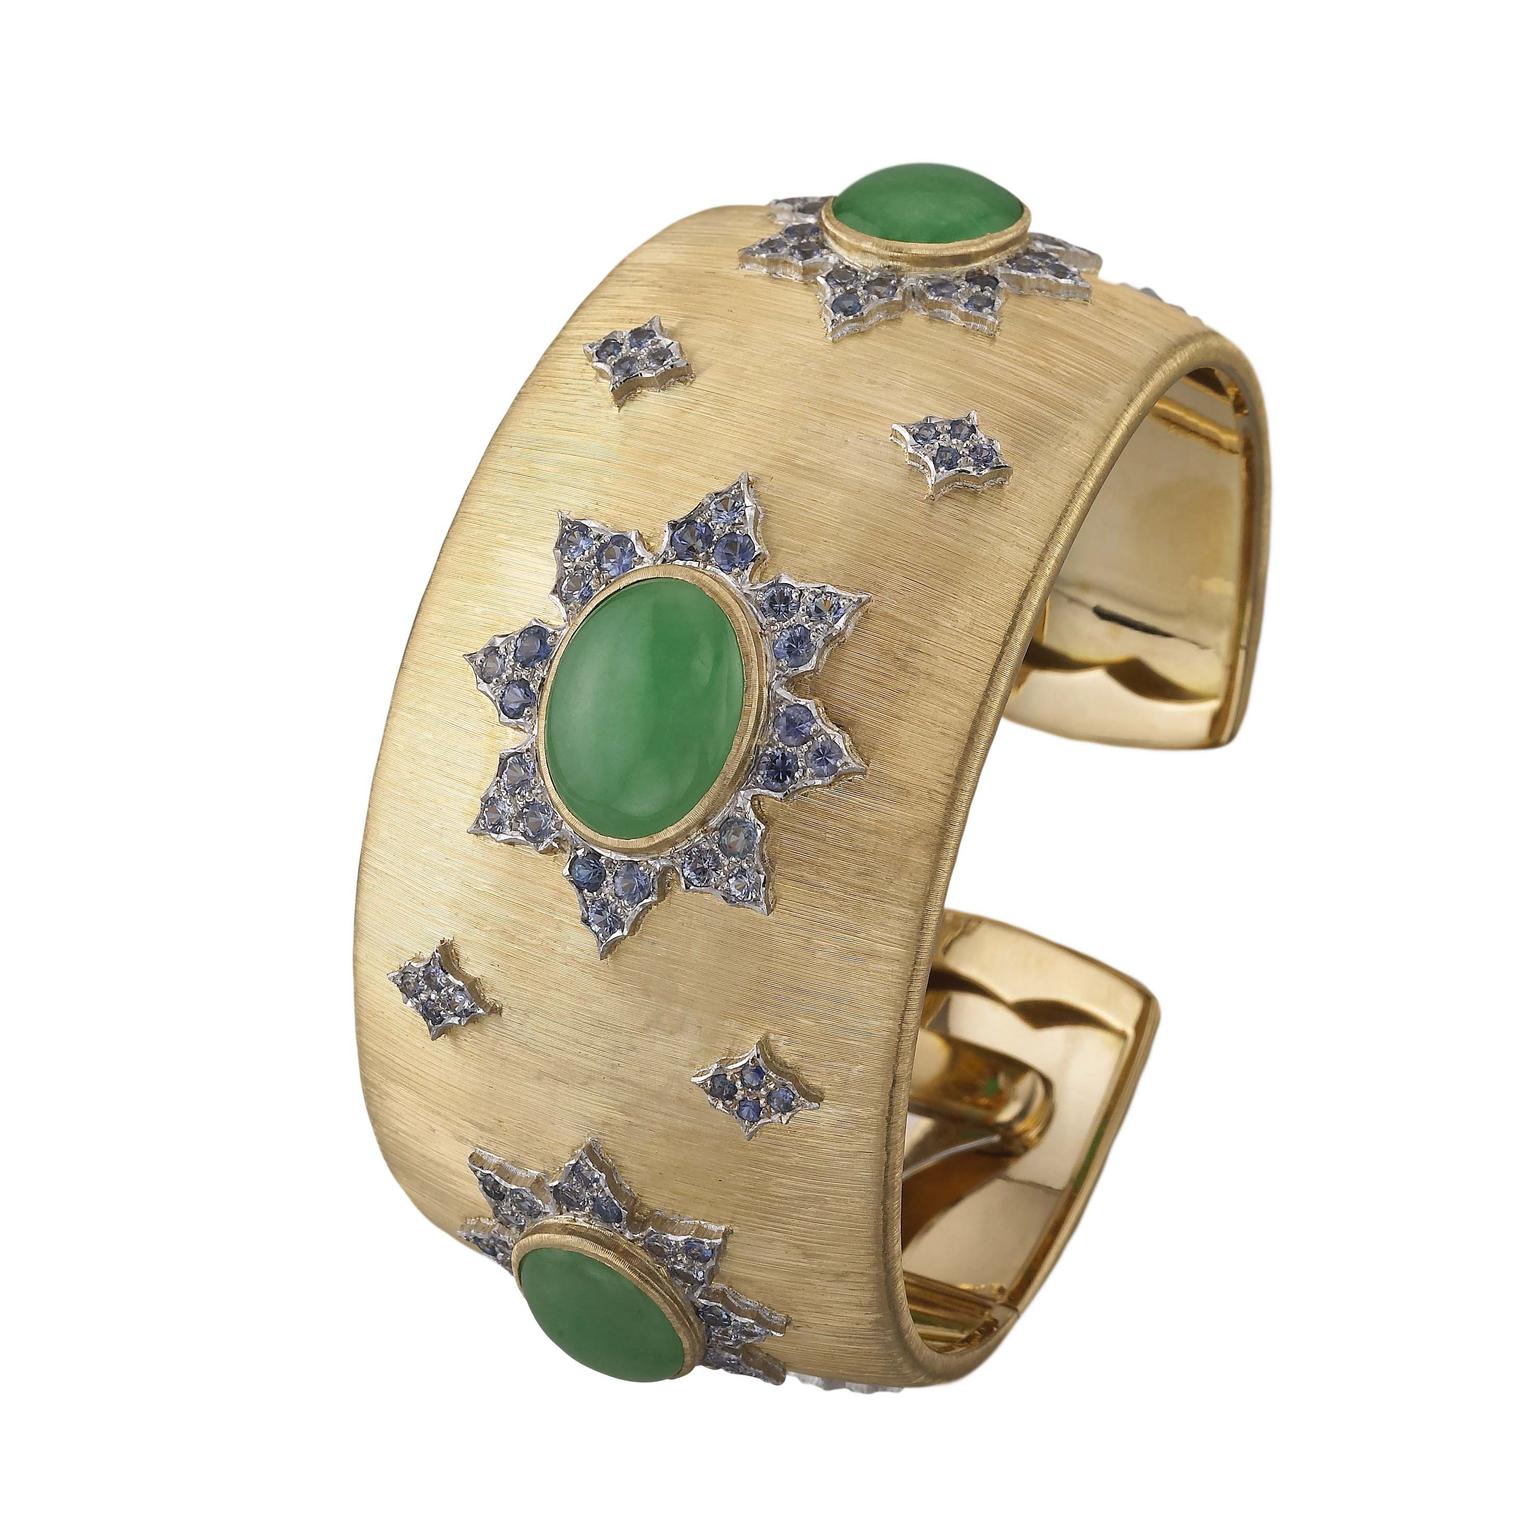 Buccellati cuff bracelet in gold, "regato" engraved and set with 19.44ct green jade and blue sapphires.